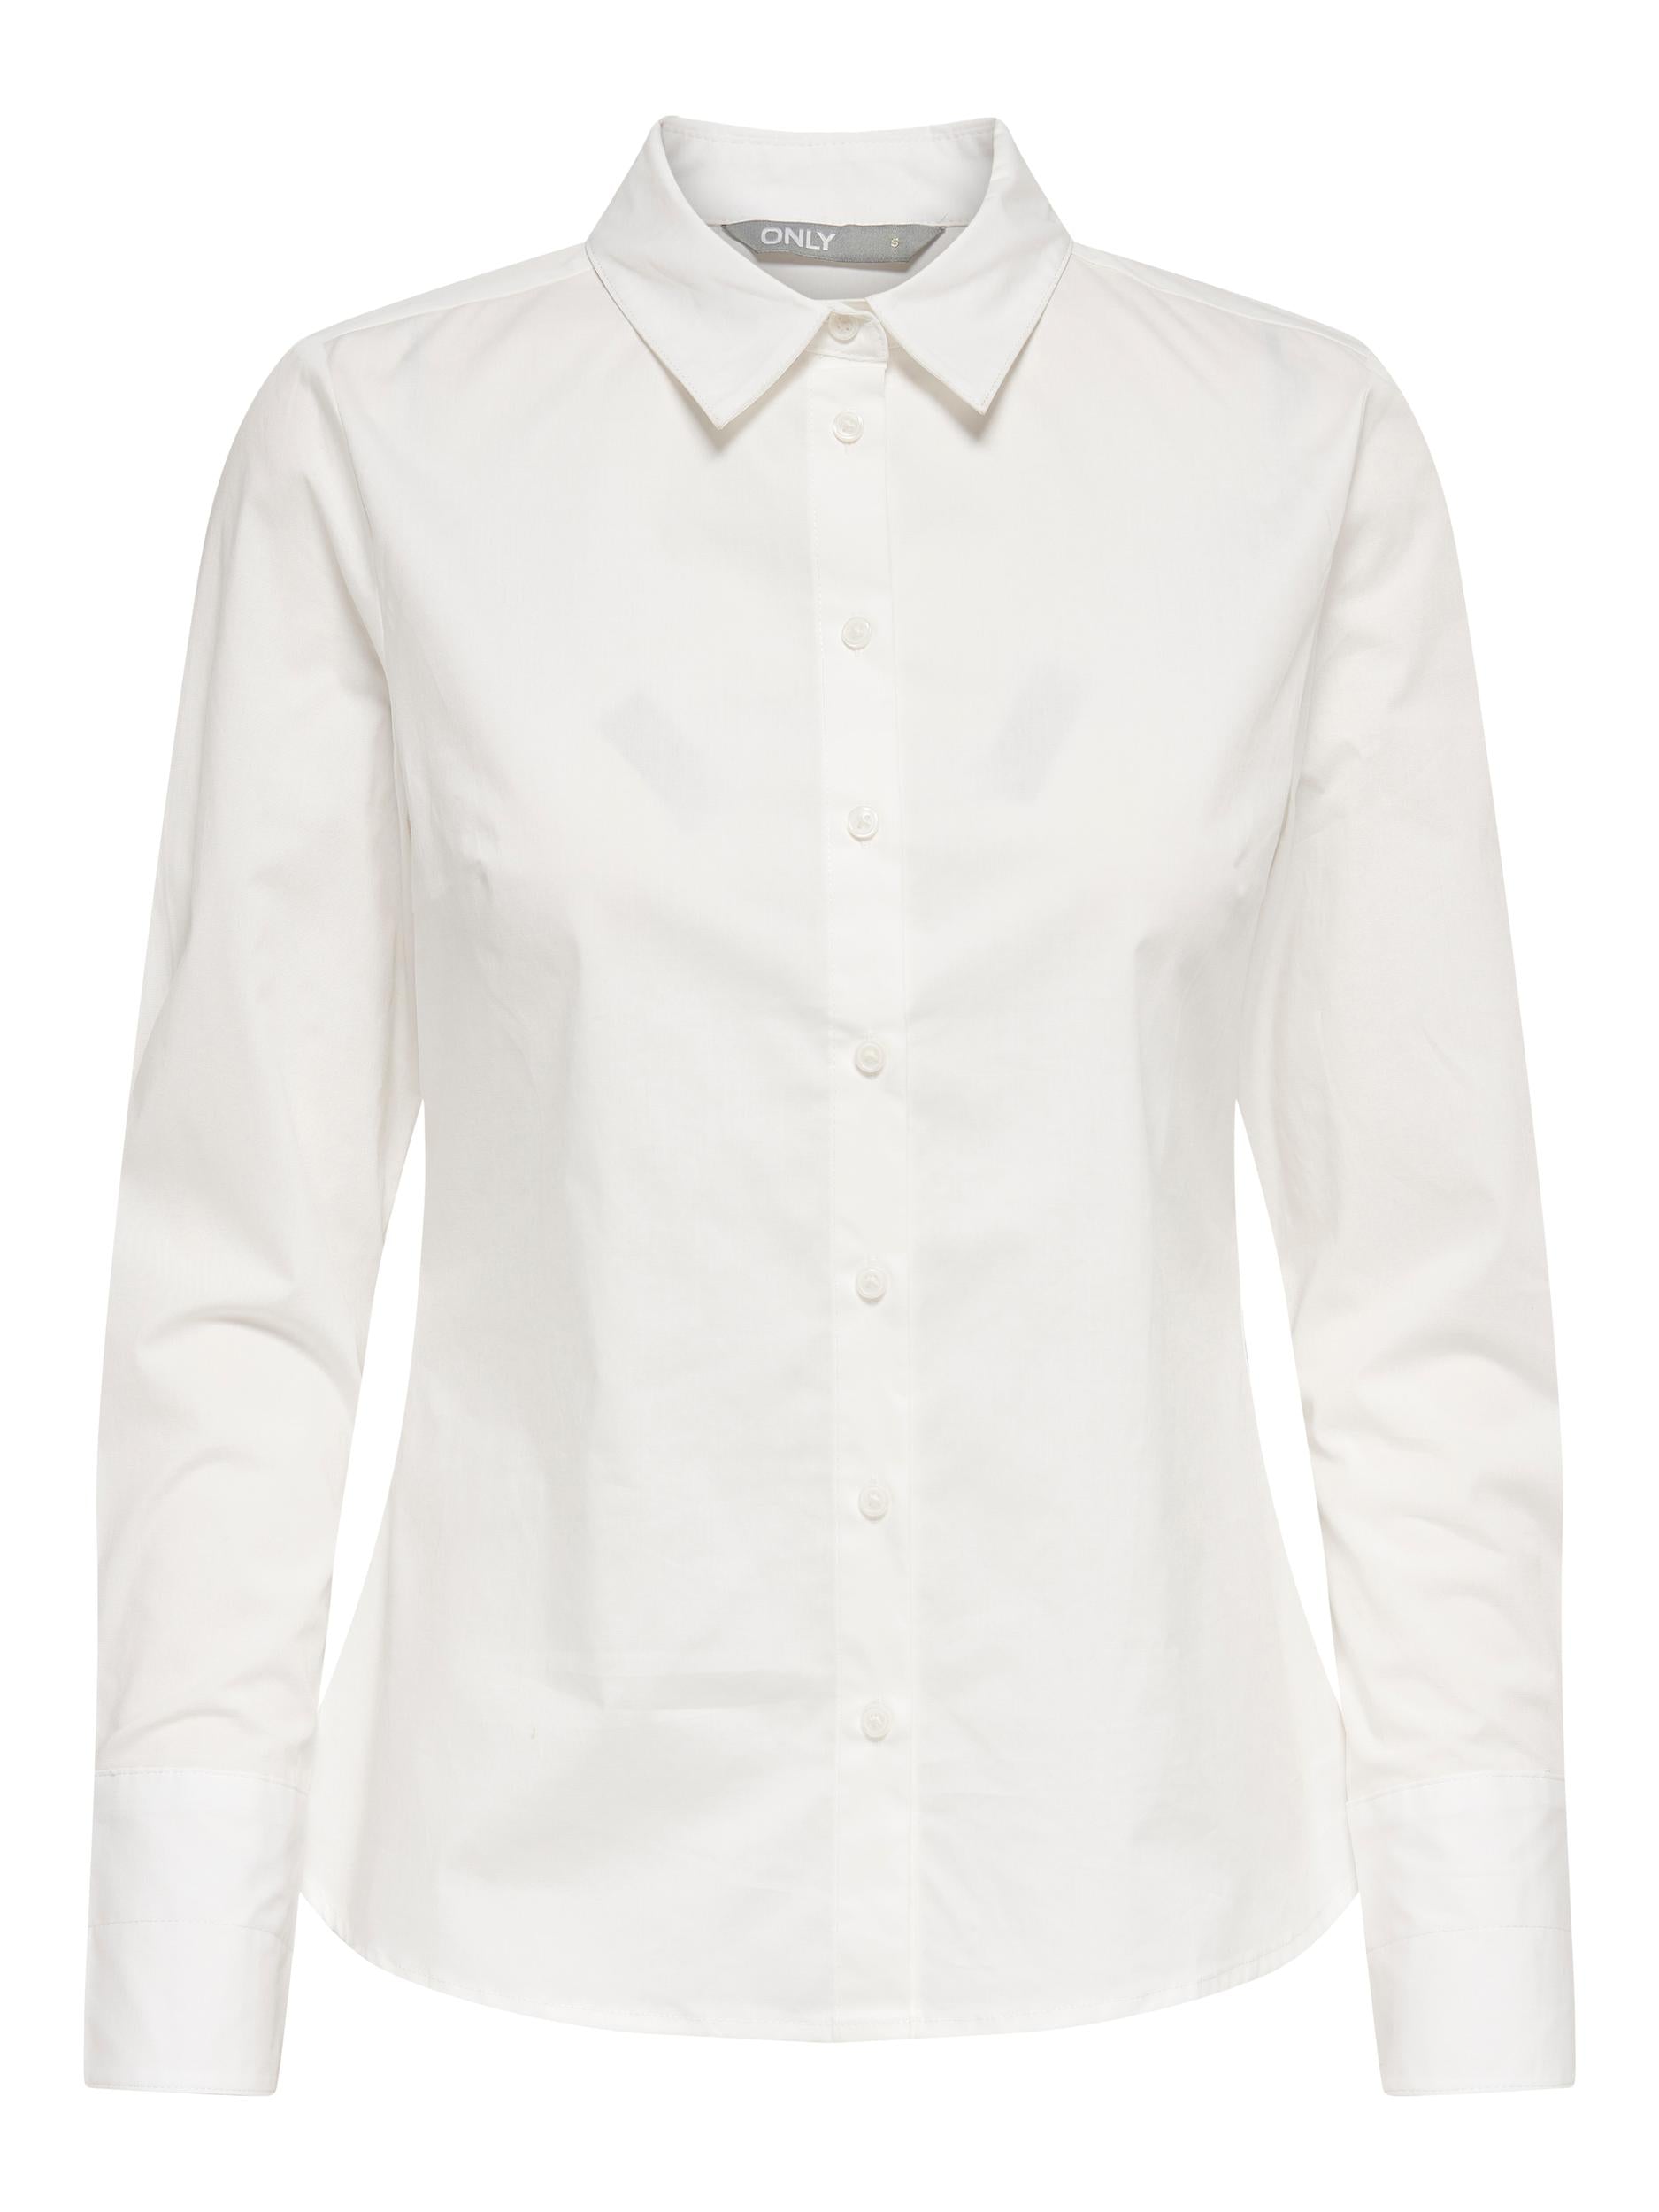 Ladies Frida Long Sleeve White Shirt-Ghost Front View